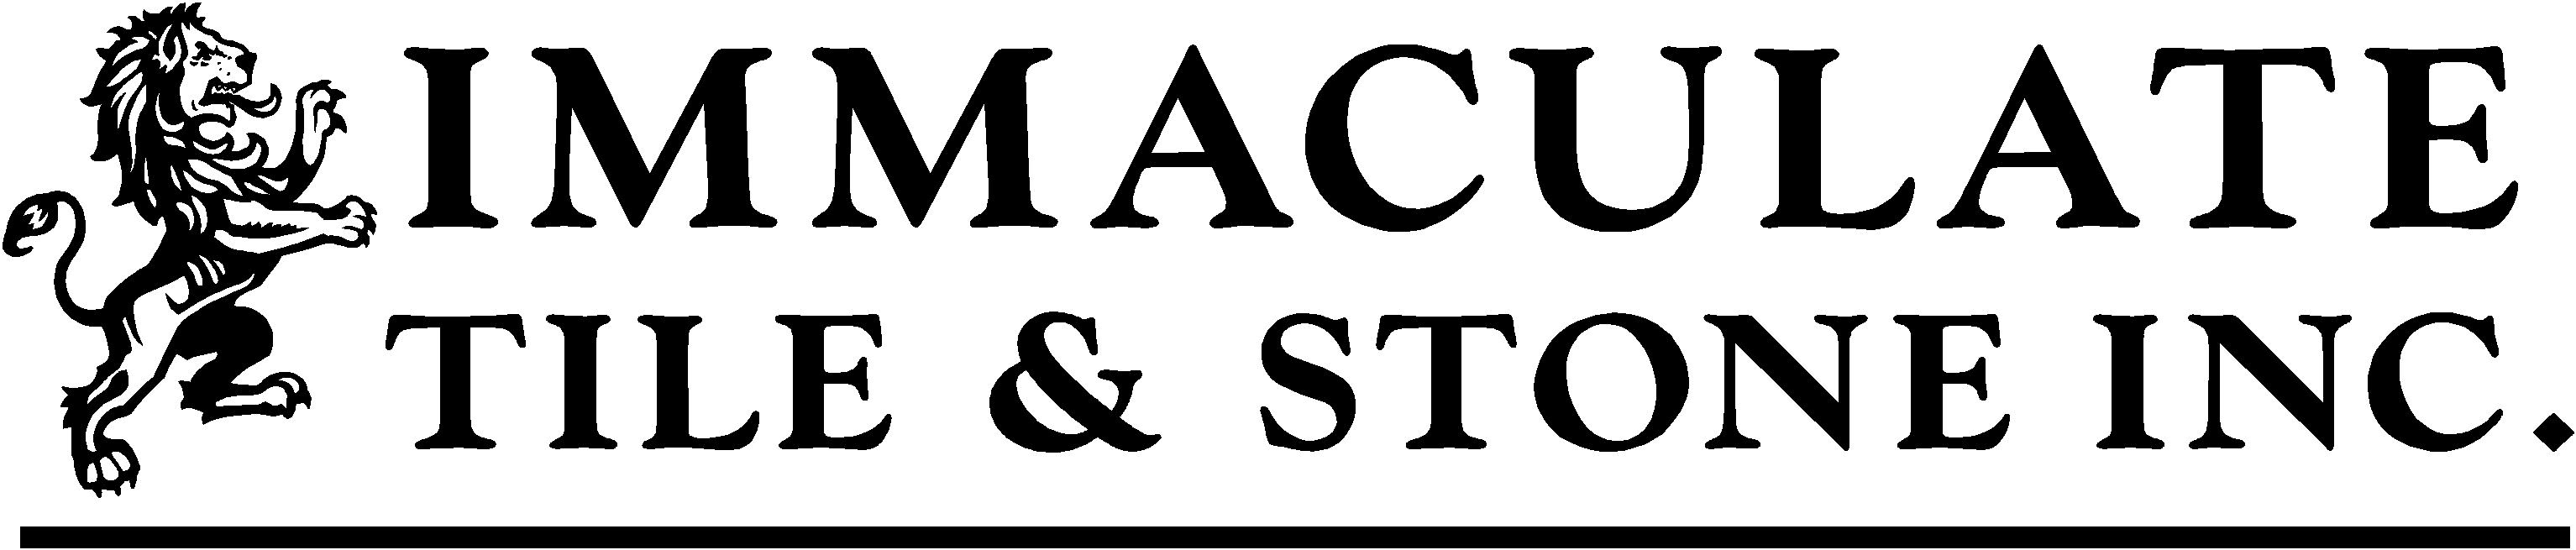 Immaculate Tile And Stone, Inc. Logo